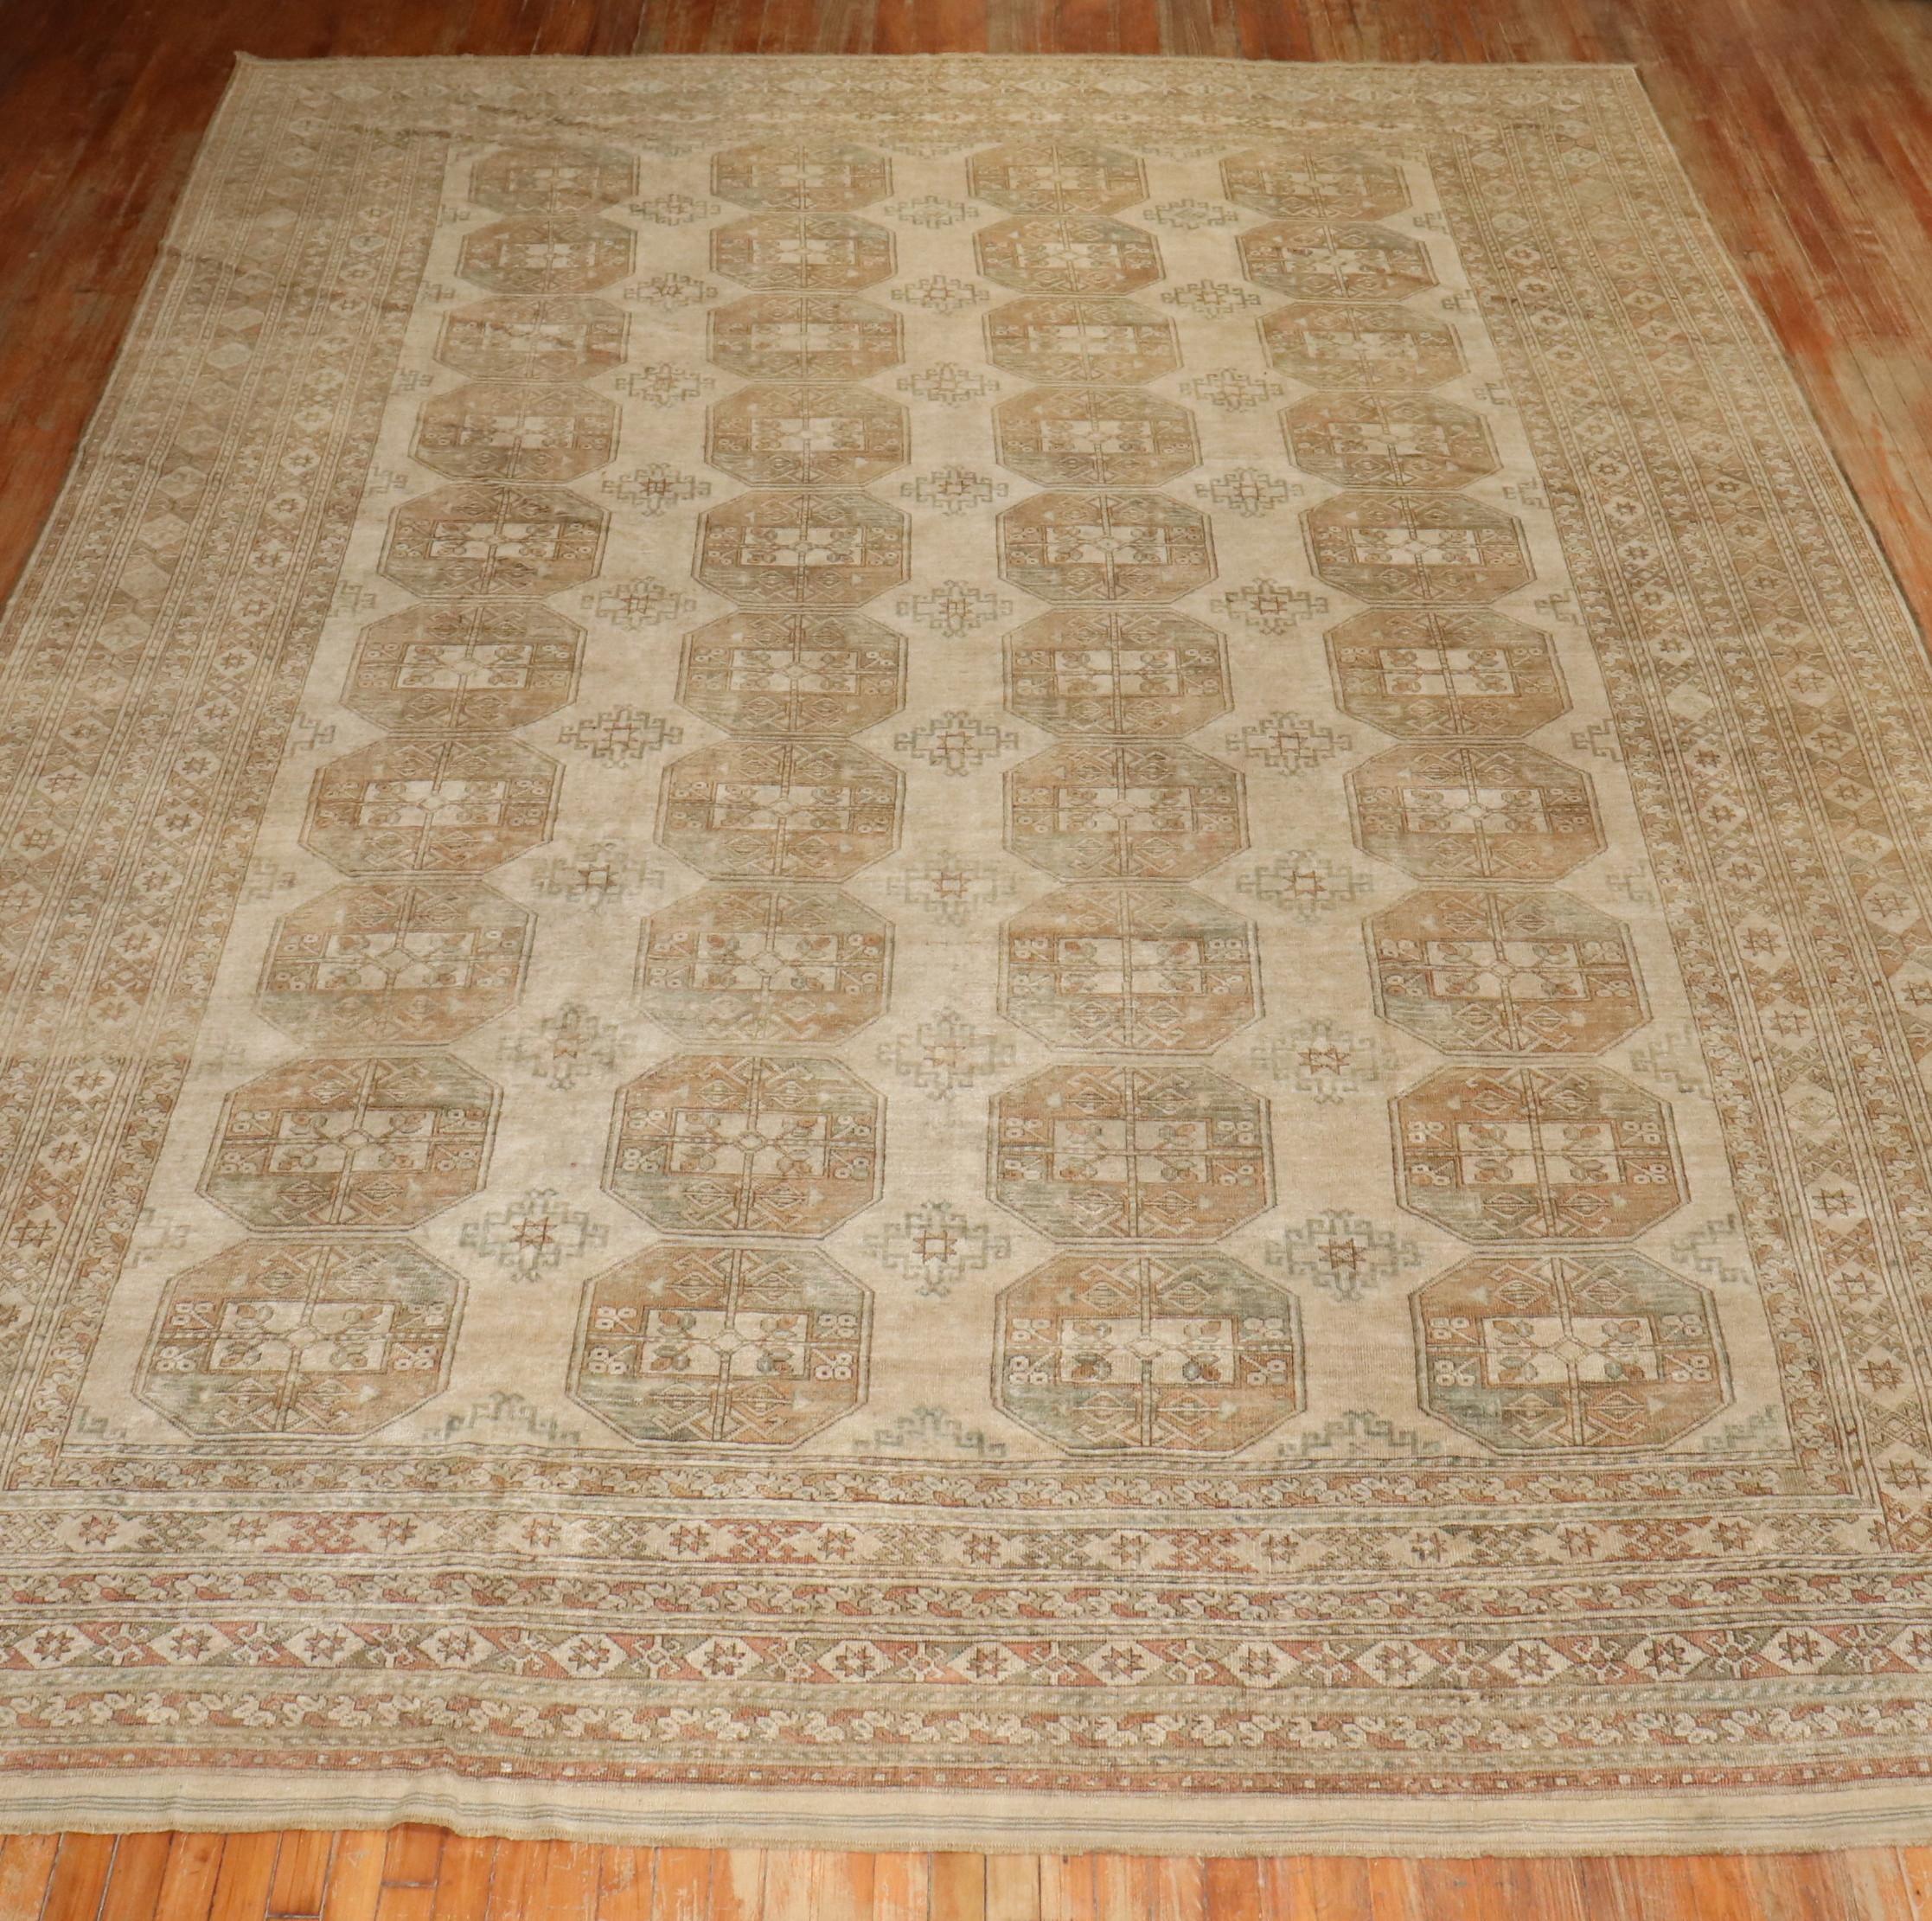 large room size Ersari Afghan Rug from the 2nd quarter of the 20th century

rug no.	j3341
size	10'7